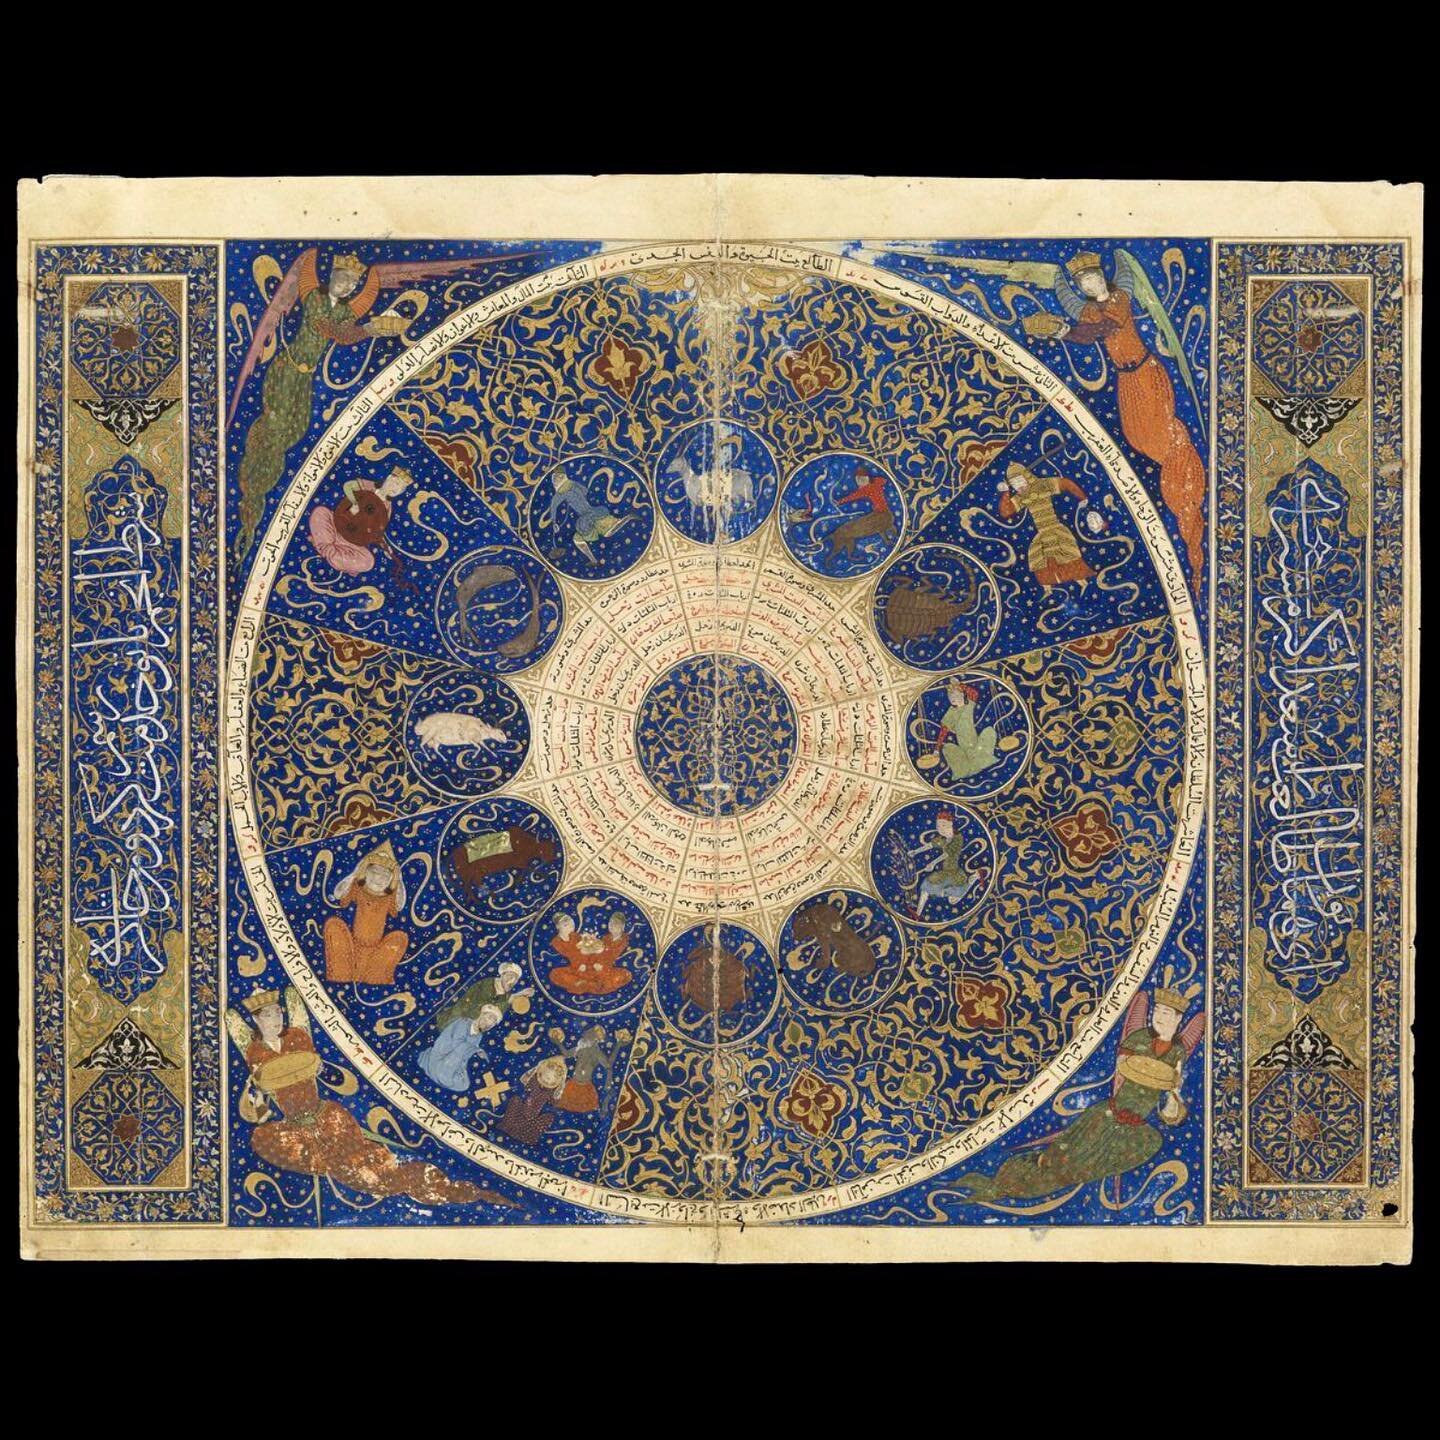 Object of desire #14 

Horoscope of Persian Timurid ruler Iskandar Sultan, 1411. This is the only surviving individual illuminated horoscope from medieval Islam. 

#objectsofdesire #epiciran